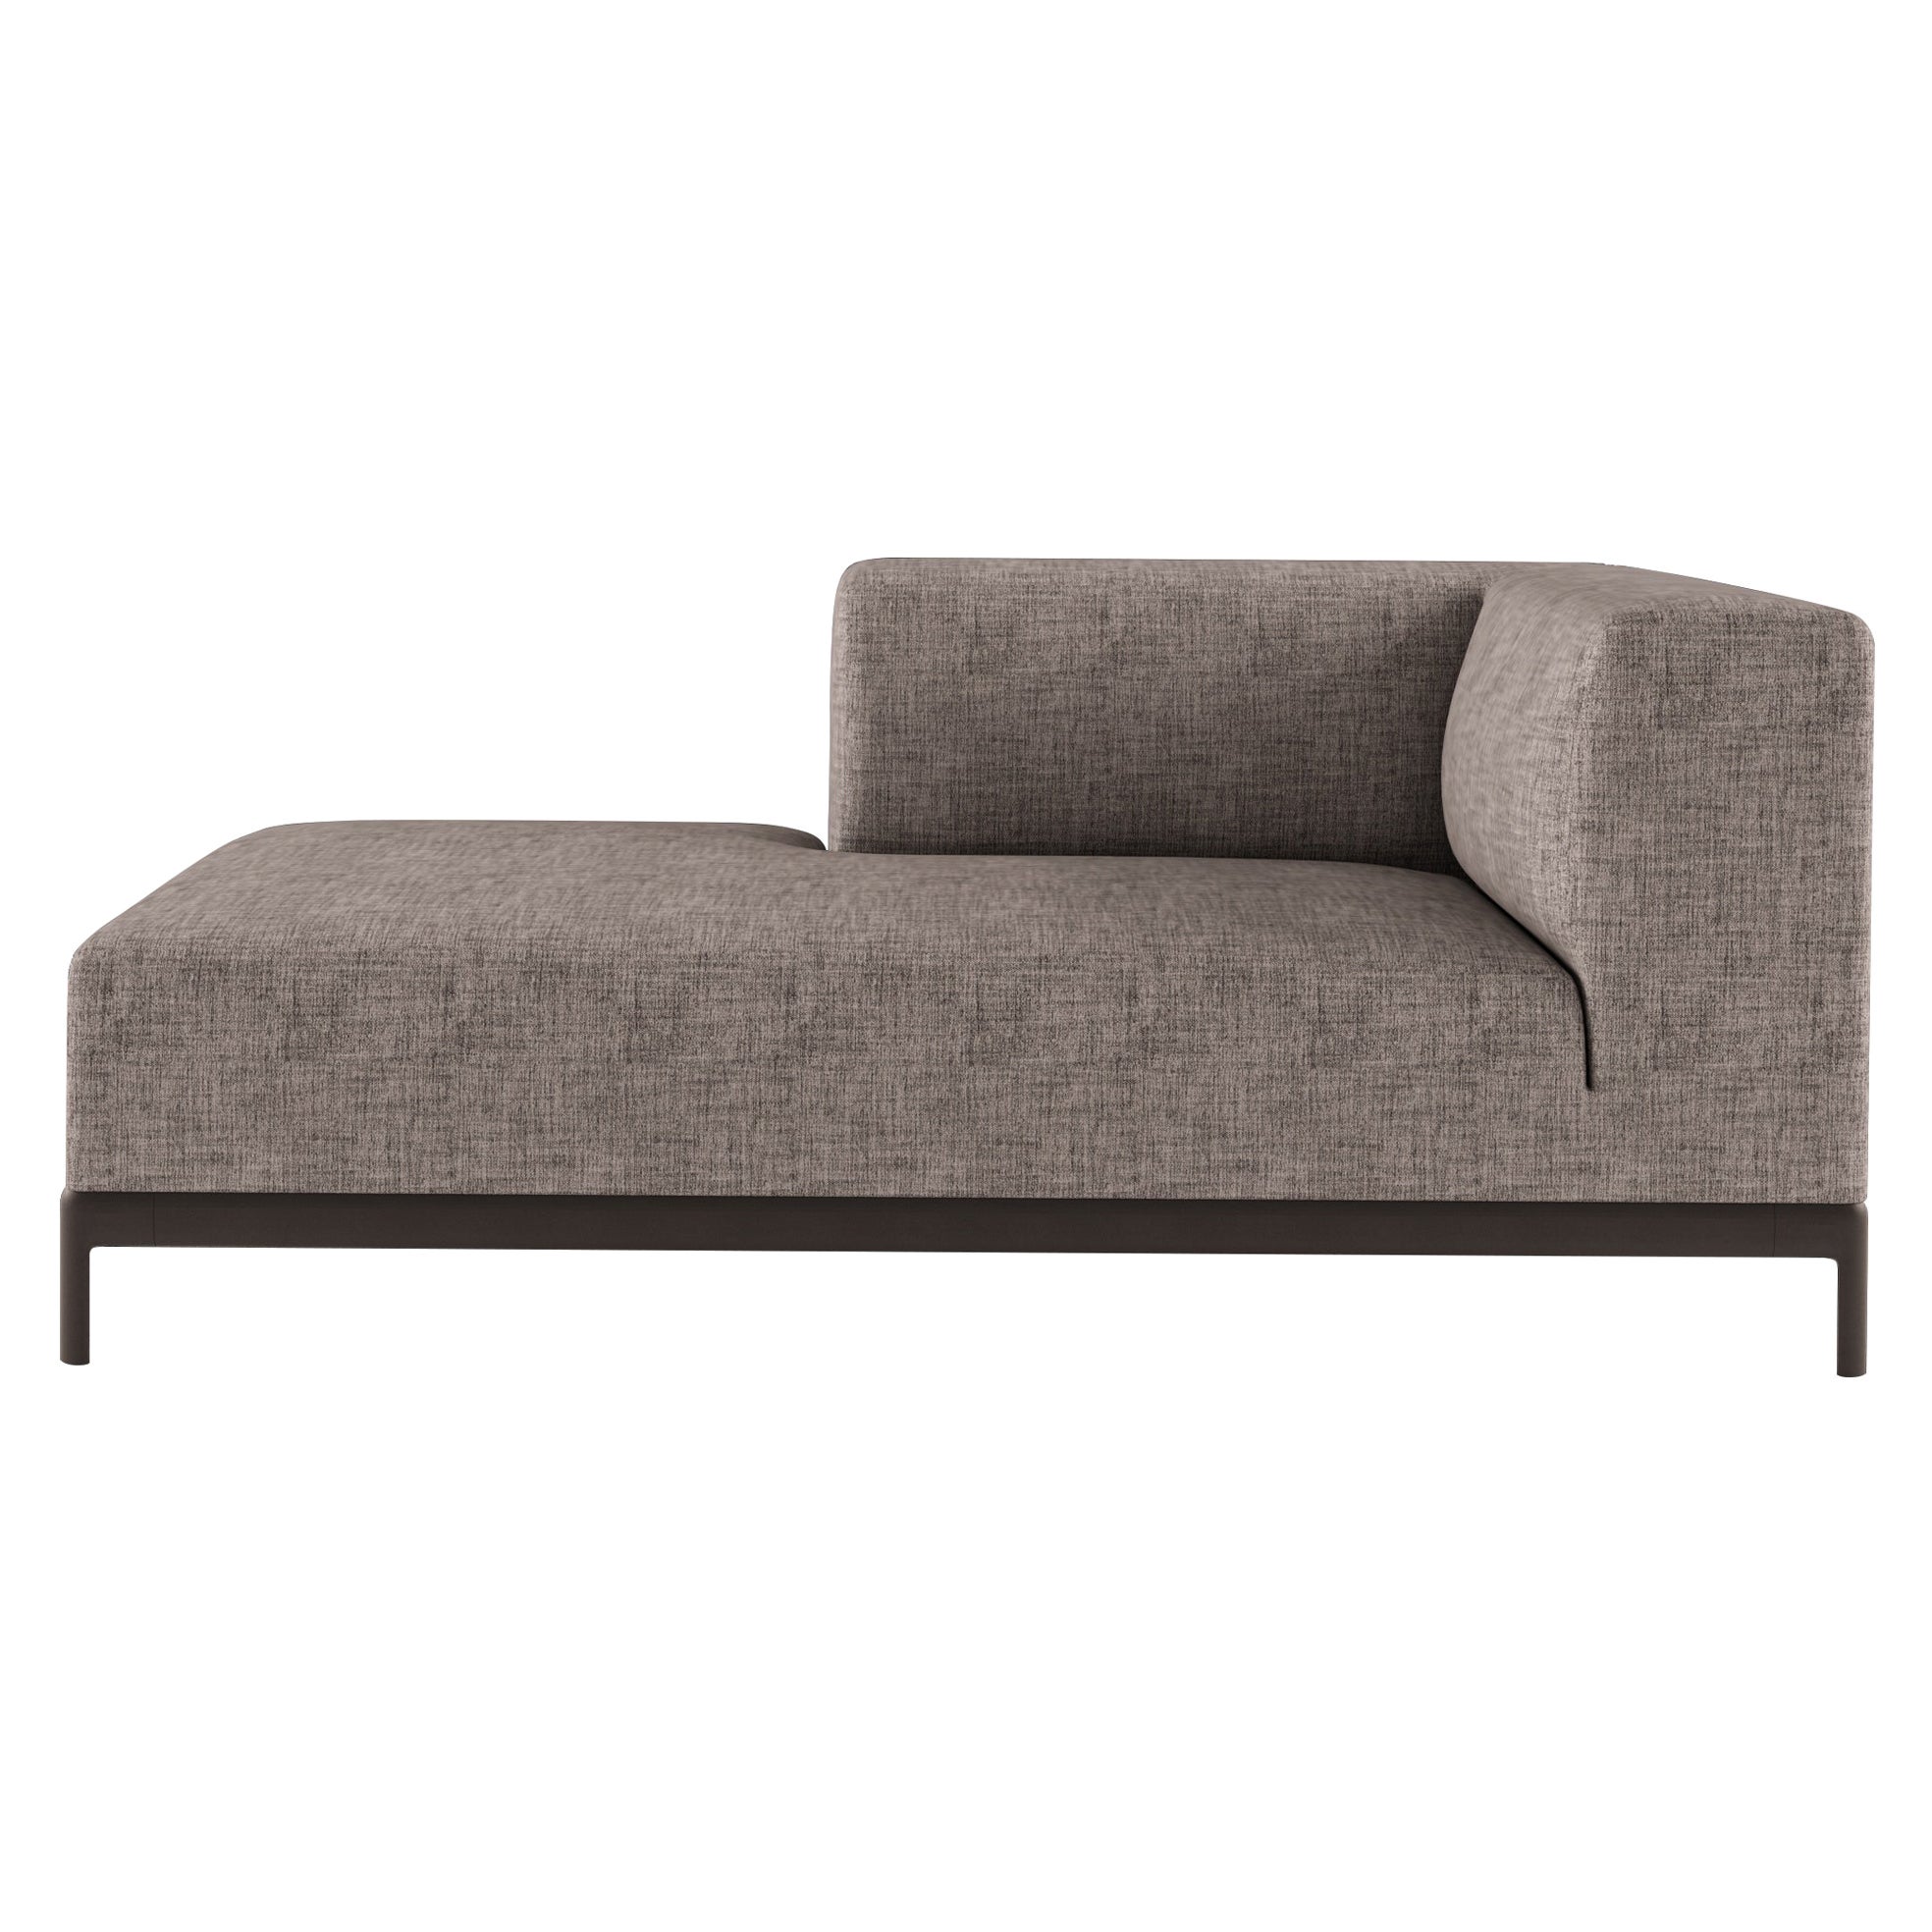 Alias P39 AluZen Soft Ending Sofa with Upholstery and Lacquered Aluminum Frame For Sale